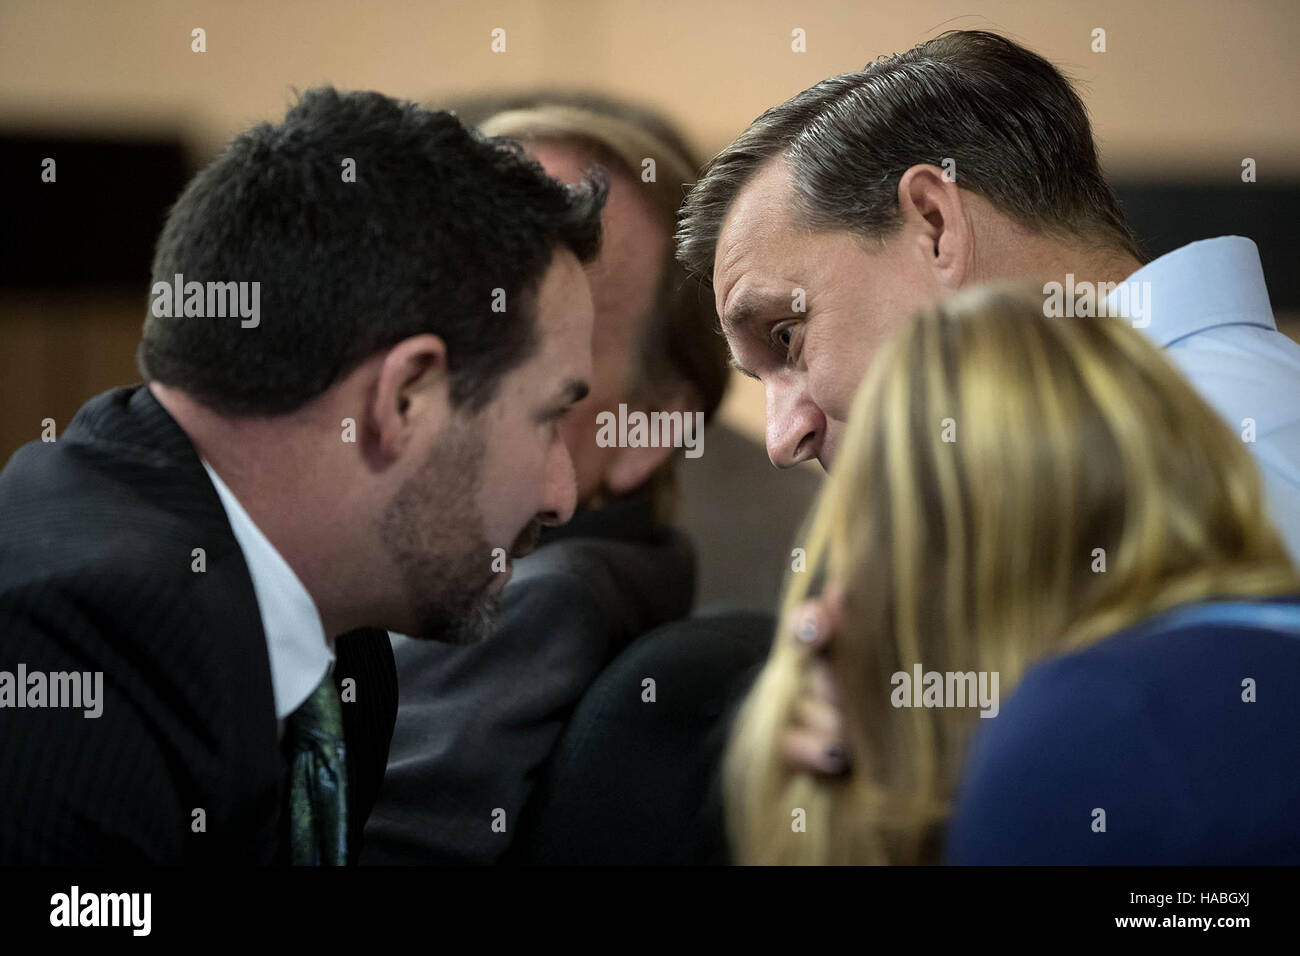 West Palm Beach, Florida, USA. 29th Nov, 2016. Blu Stephanos, the father of Austin Stephanos, (right) and his mother, Carly Black, (foreground) talk with attorney Mike Pike (left) during a hearing at the Palm Beach County Courthouse in West Palm Beach, Florida on November 29, 2016. Perry Cohen's father has filed a bill of discovery to allow release of the electronic information. Attorneys for Perry Cohen's mother Pamela, as well as Blu Stephanos and Carly Black - the parents of Austin - want the bill of discovery denied. © Allen Eyestone/The Palm Beach Post/ZUMA Wire/Alamy Live News Stock Photo